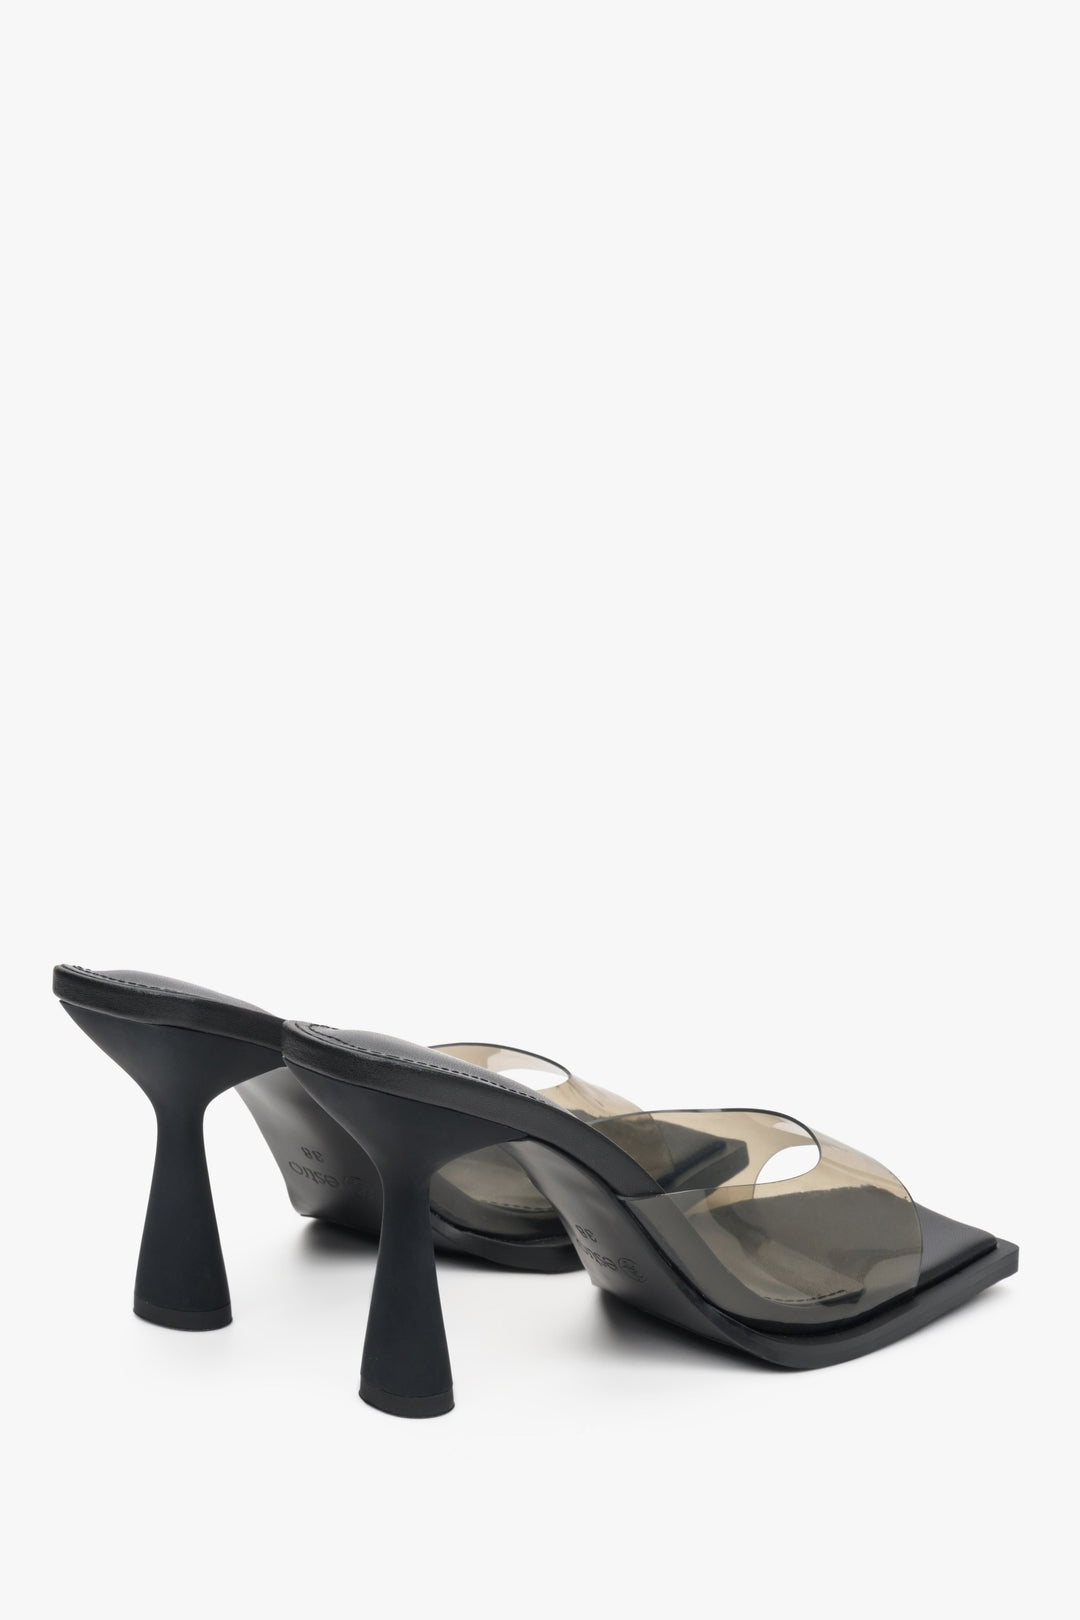 Estro women's clear high-heeled sandals with a black sole - close-up on the rear part of the footwear.